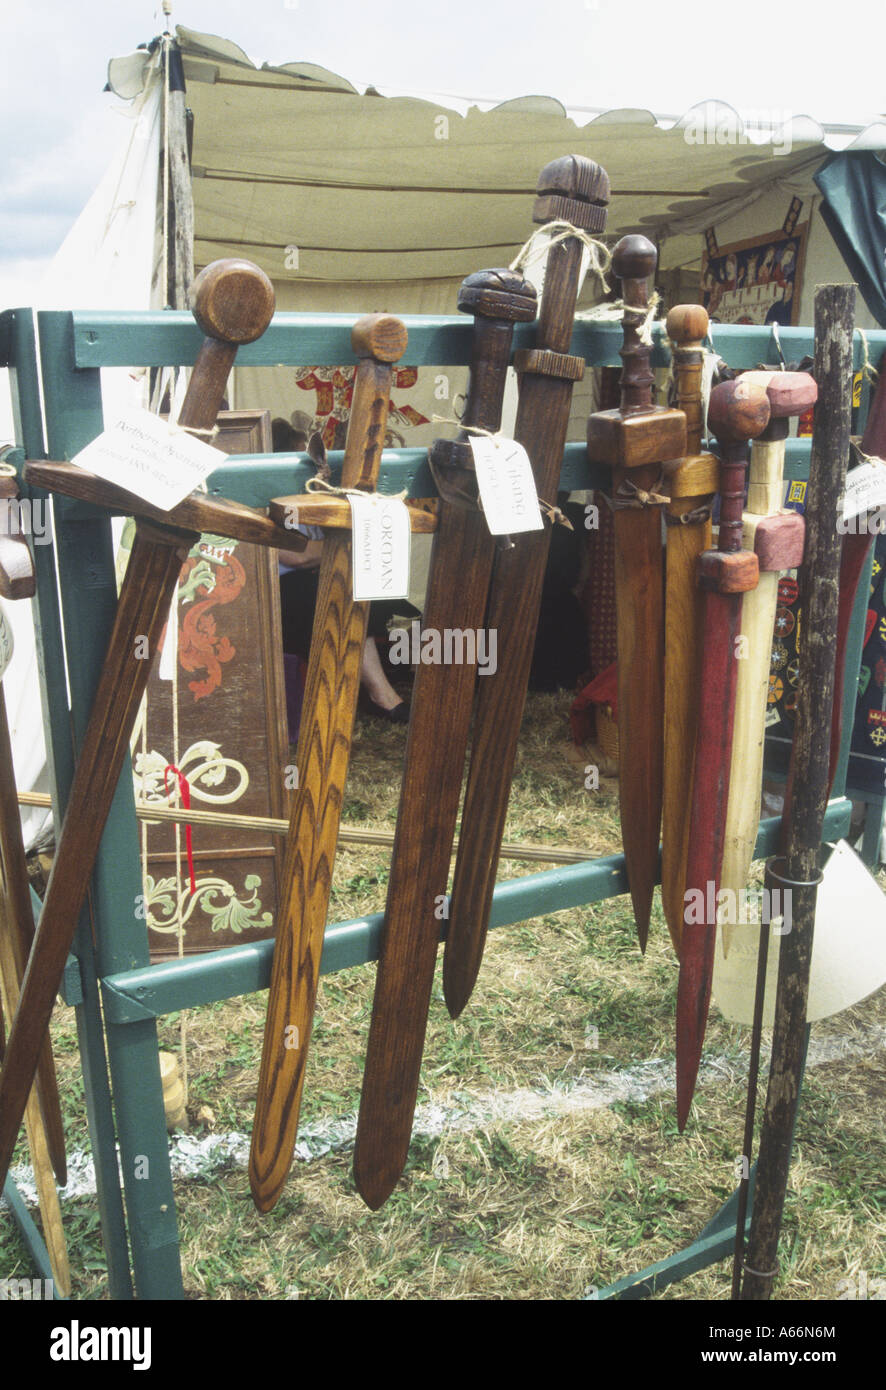 TEWKESBURY, UK - 08 July 2006 : Wooden swords displayed on a market stall on 08 July at Tewkesbury Medieval Festival, Gloucester Stock Photo